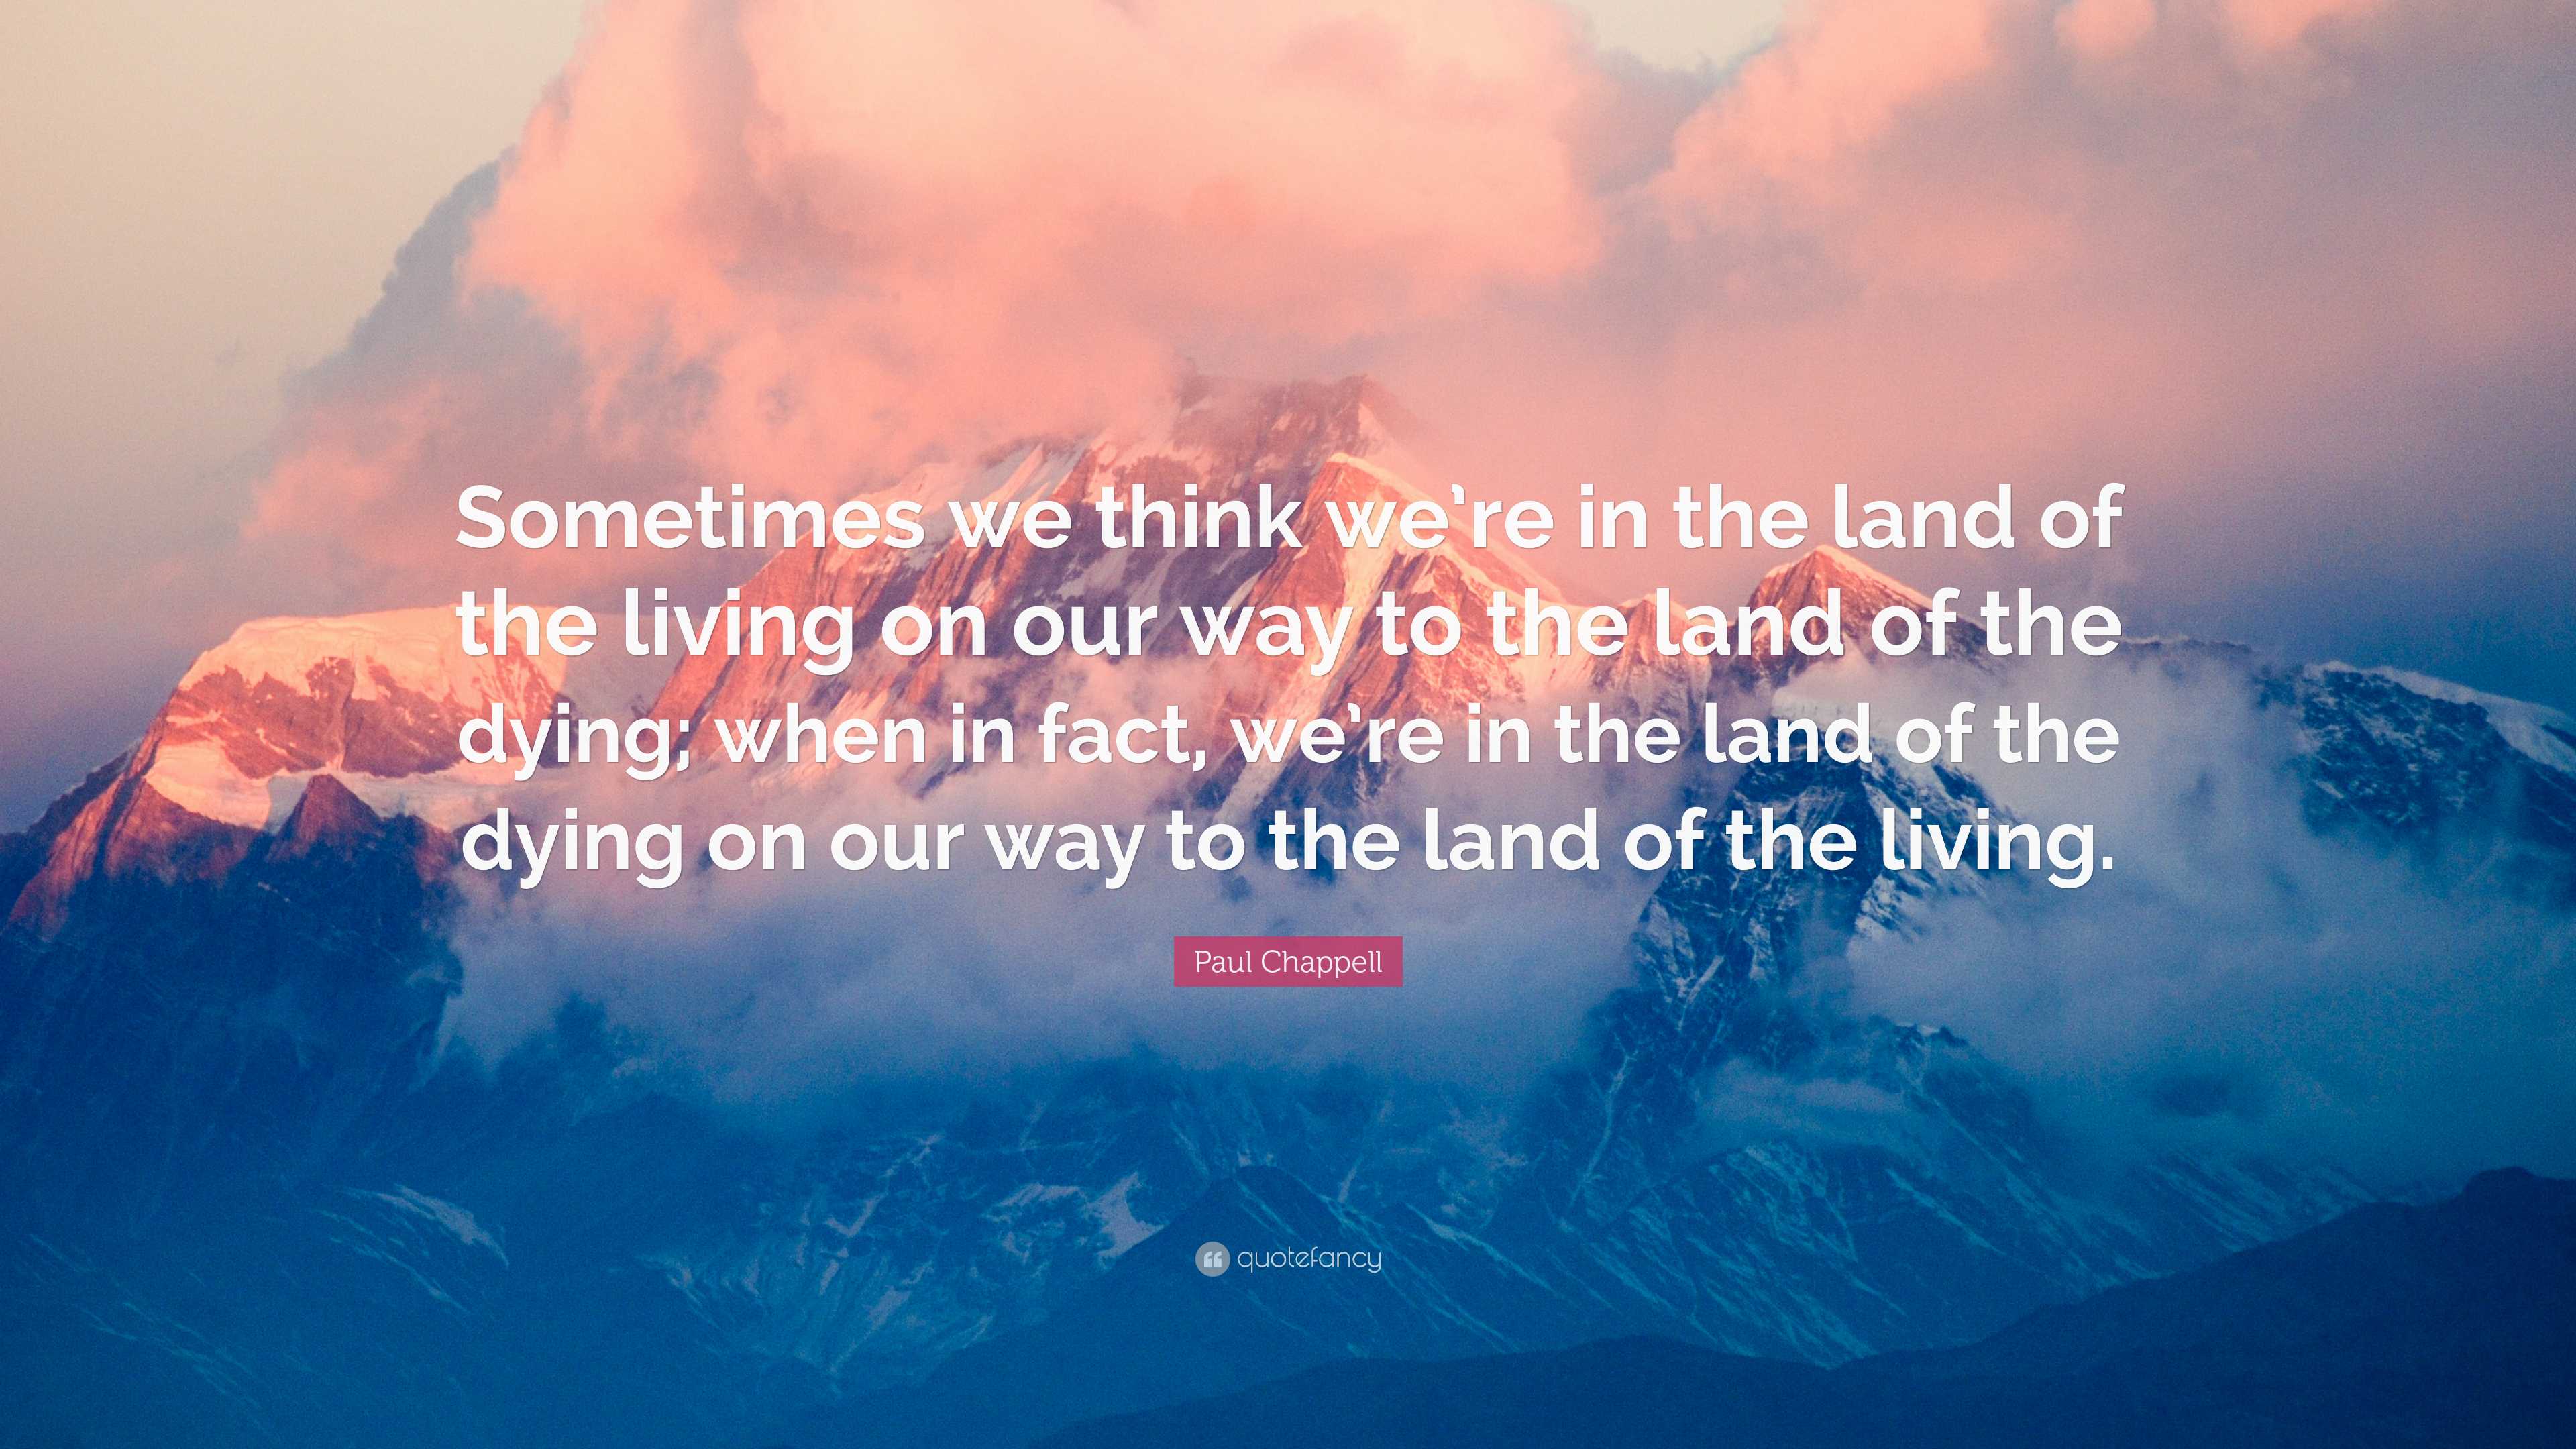 Paul Chappell Quote: “Sometimes we think we’re in the land of the ...